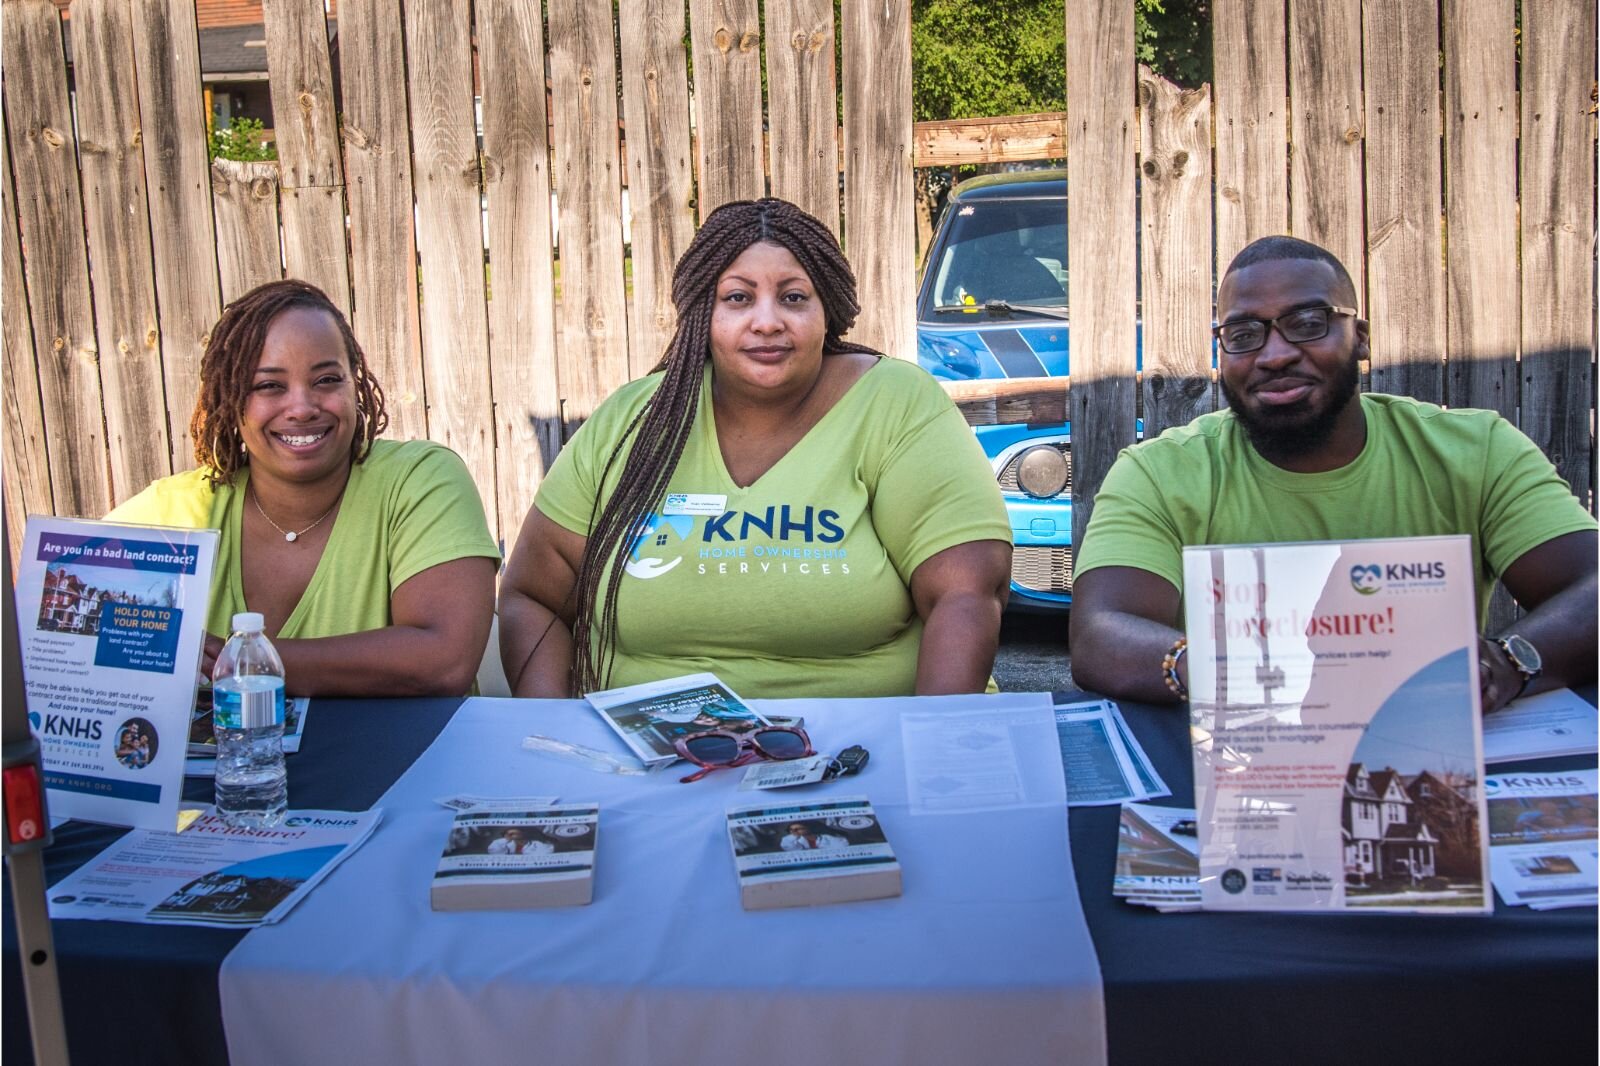 Kalamazoo Neighborhood Housing Services at At the Edison Neighborhood Celebration of National Night Out 2022. Photo by Fran Dwight.